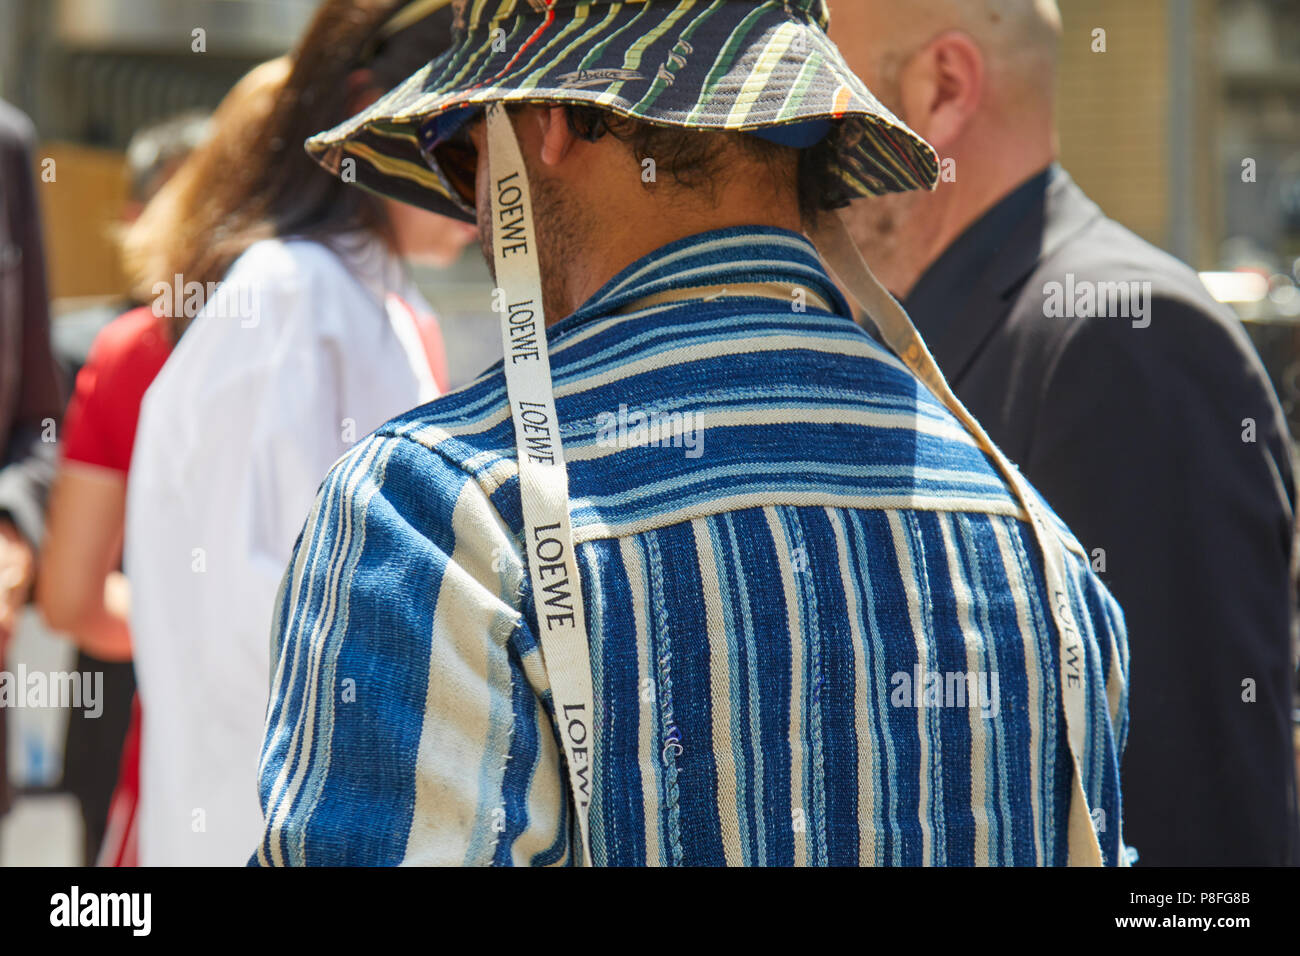 MILAN - JUNE 16: Man with Loewe knit hat and blue and white striped shirt before Marni fashion show, Milan Fashion Week street style on June 16, 2018  Stock Photo